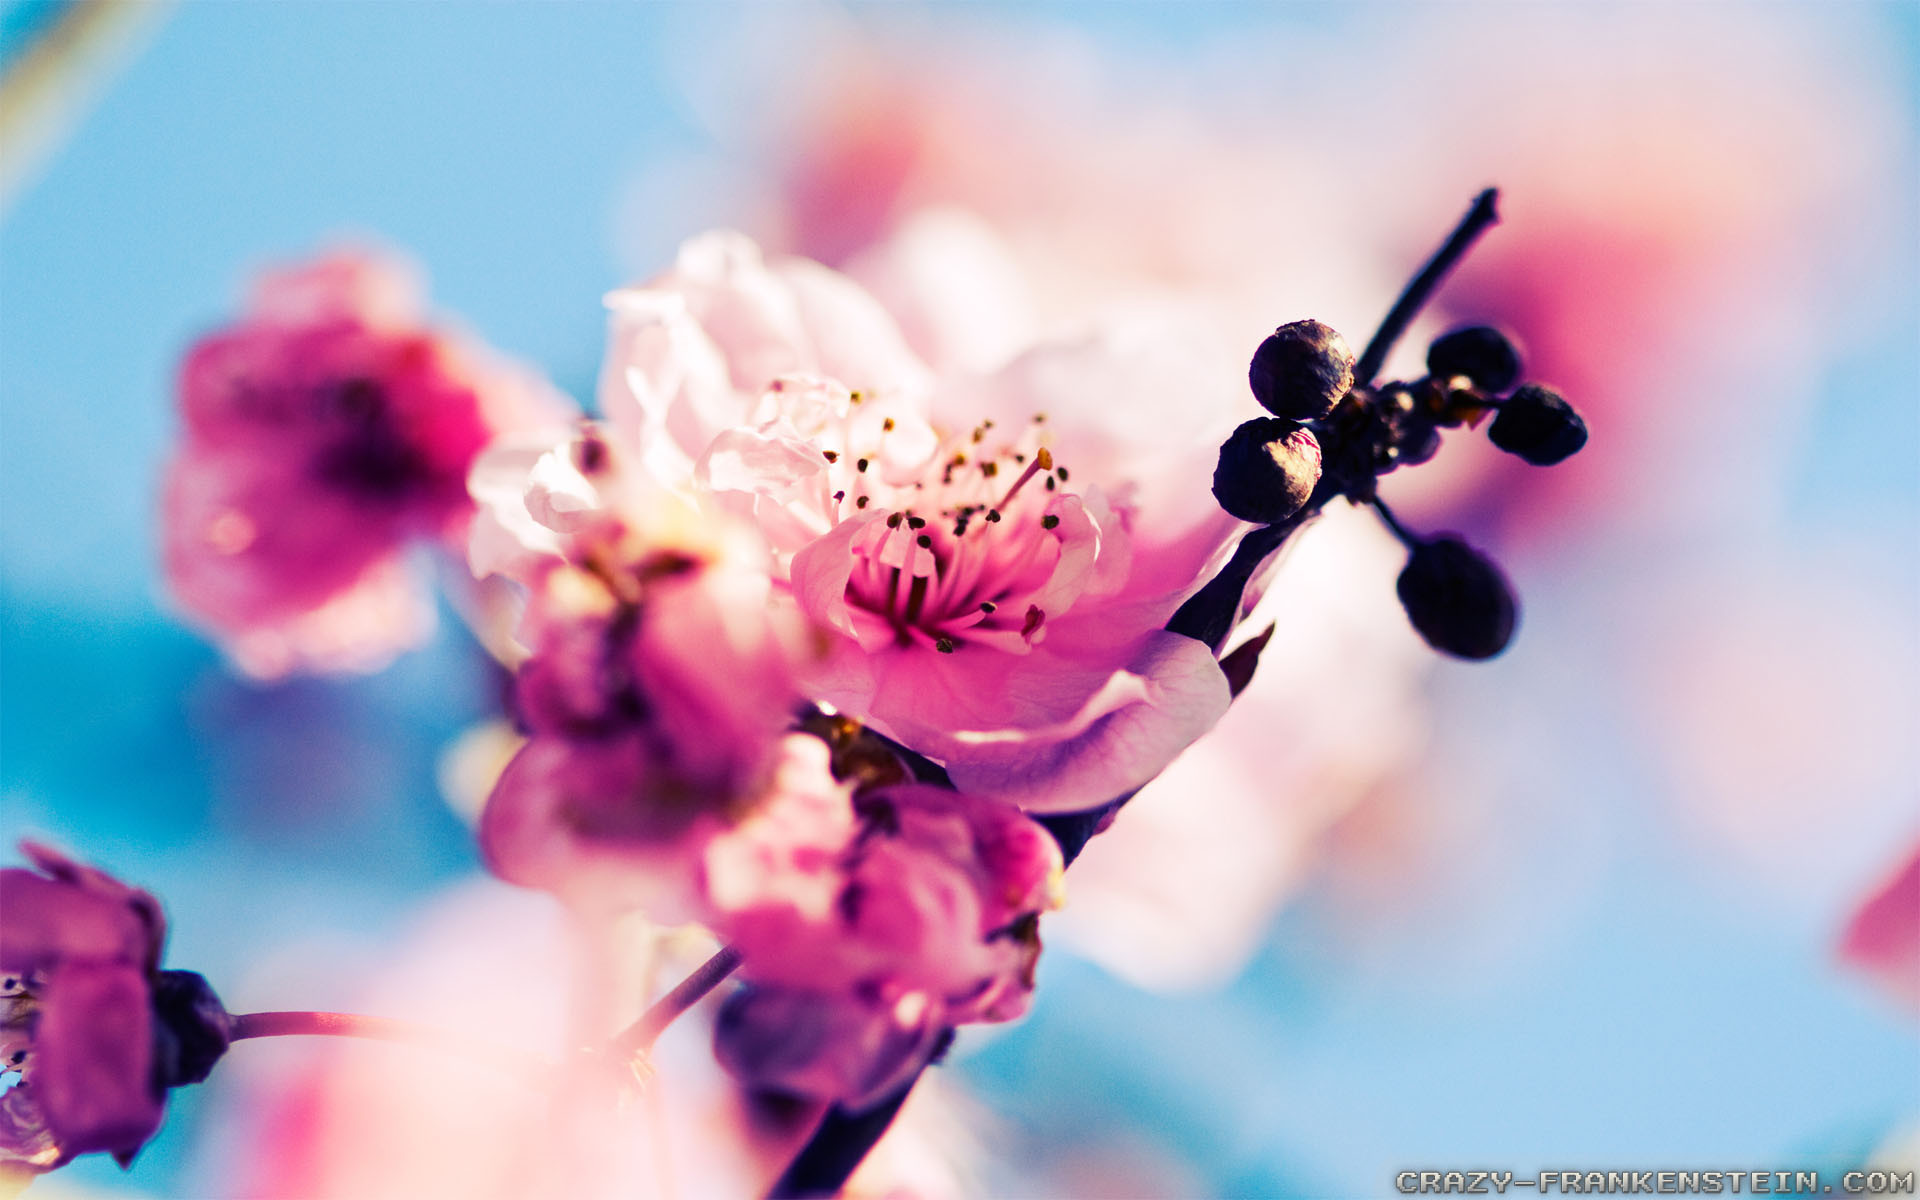 1920x1200 Wallpaper: Blossoms early Spring wallpapers. Resolution: 1024x768 |  1280x1024 | 1600x1200. Widescreen Res: 1440x900 | 1680x1050 | 